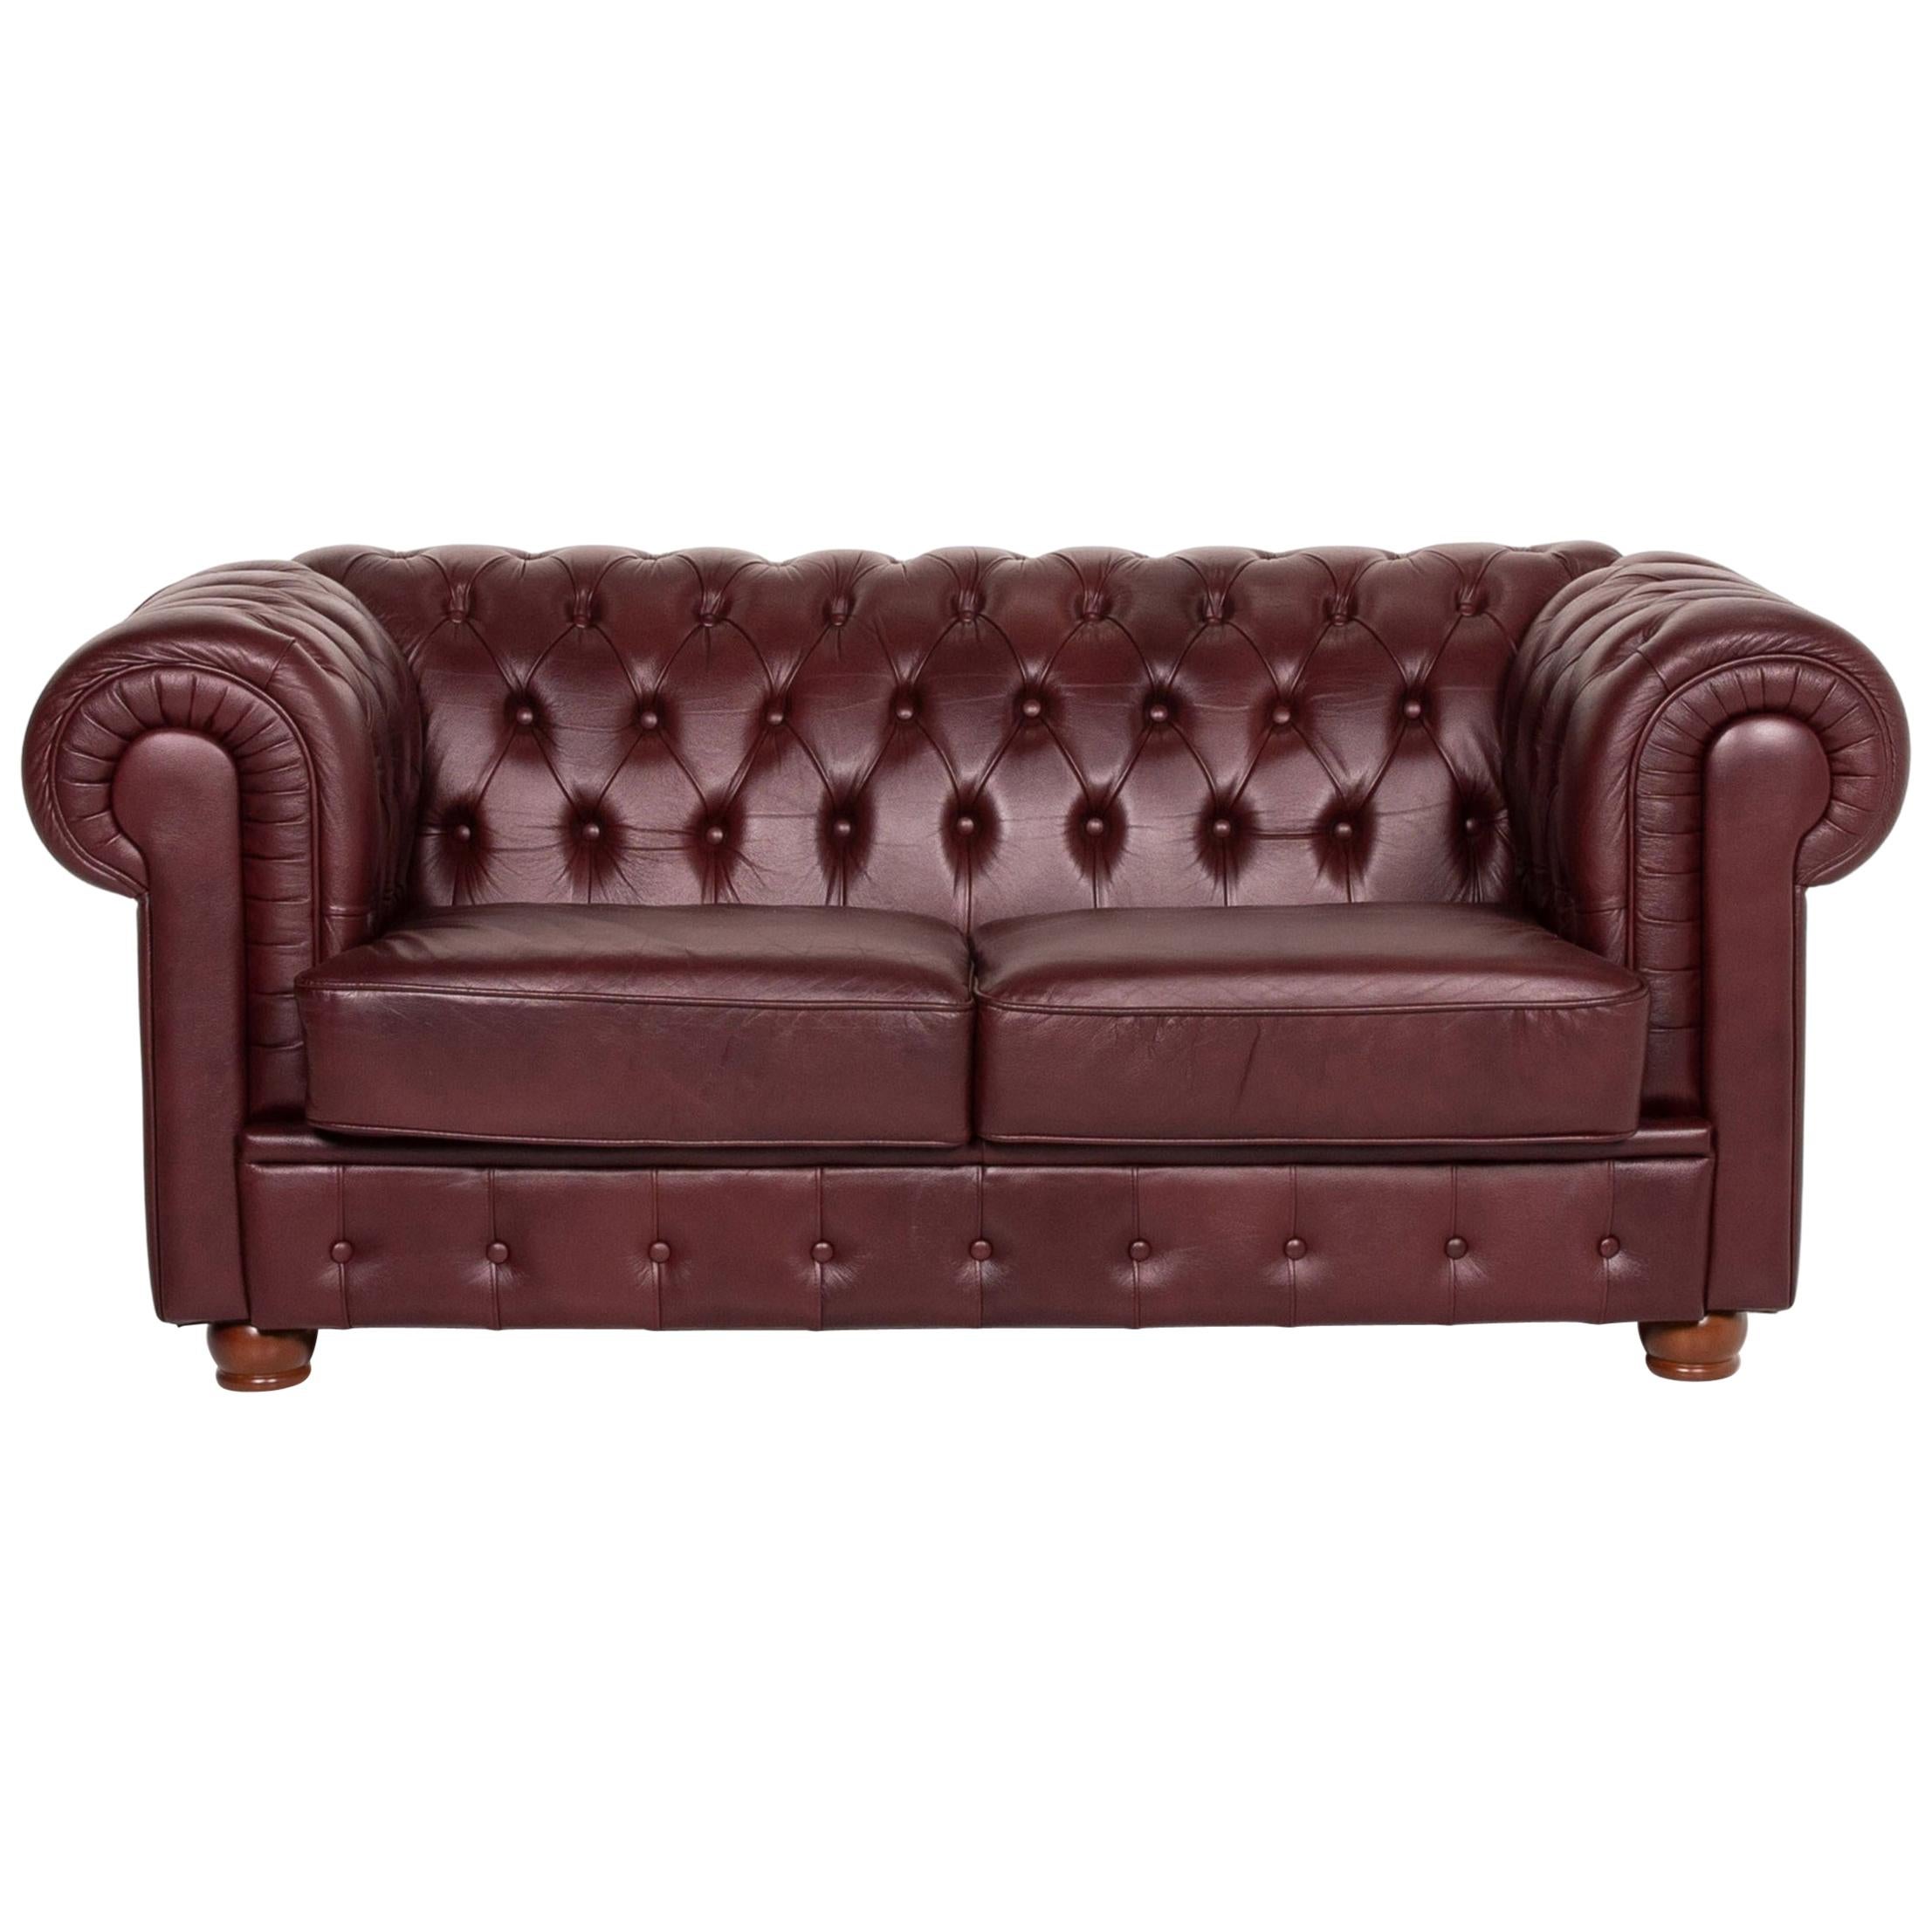 Chesterfield Leather Sofa Bordeaux Red Two-Seat Vintage Retro Couch For Sale